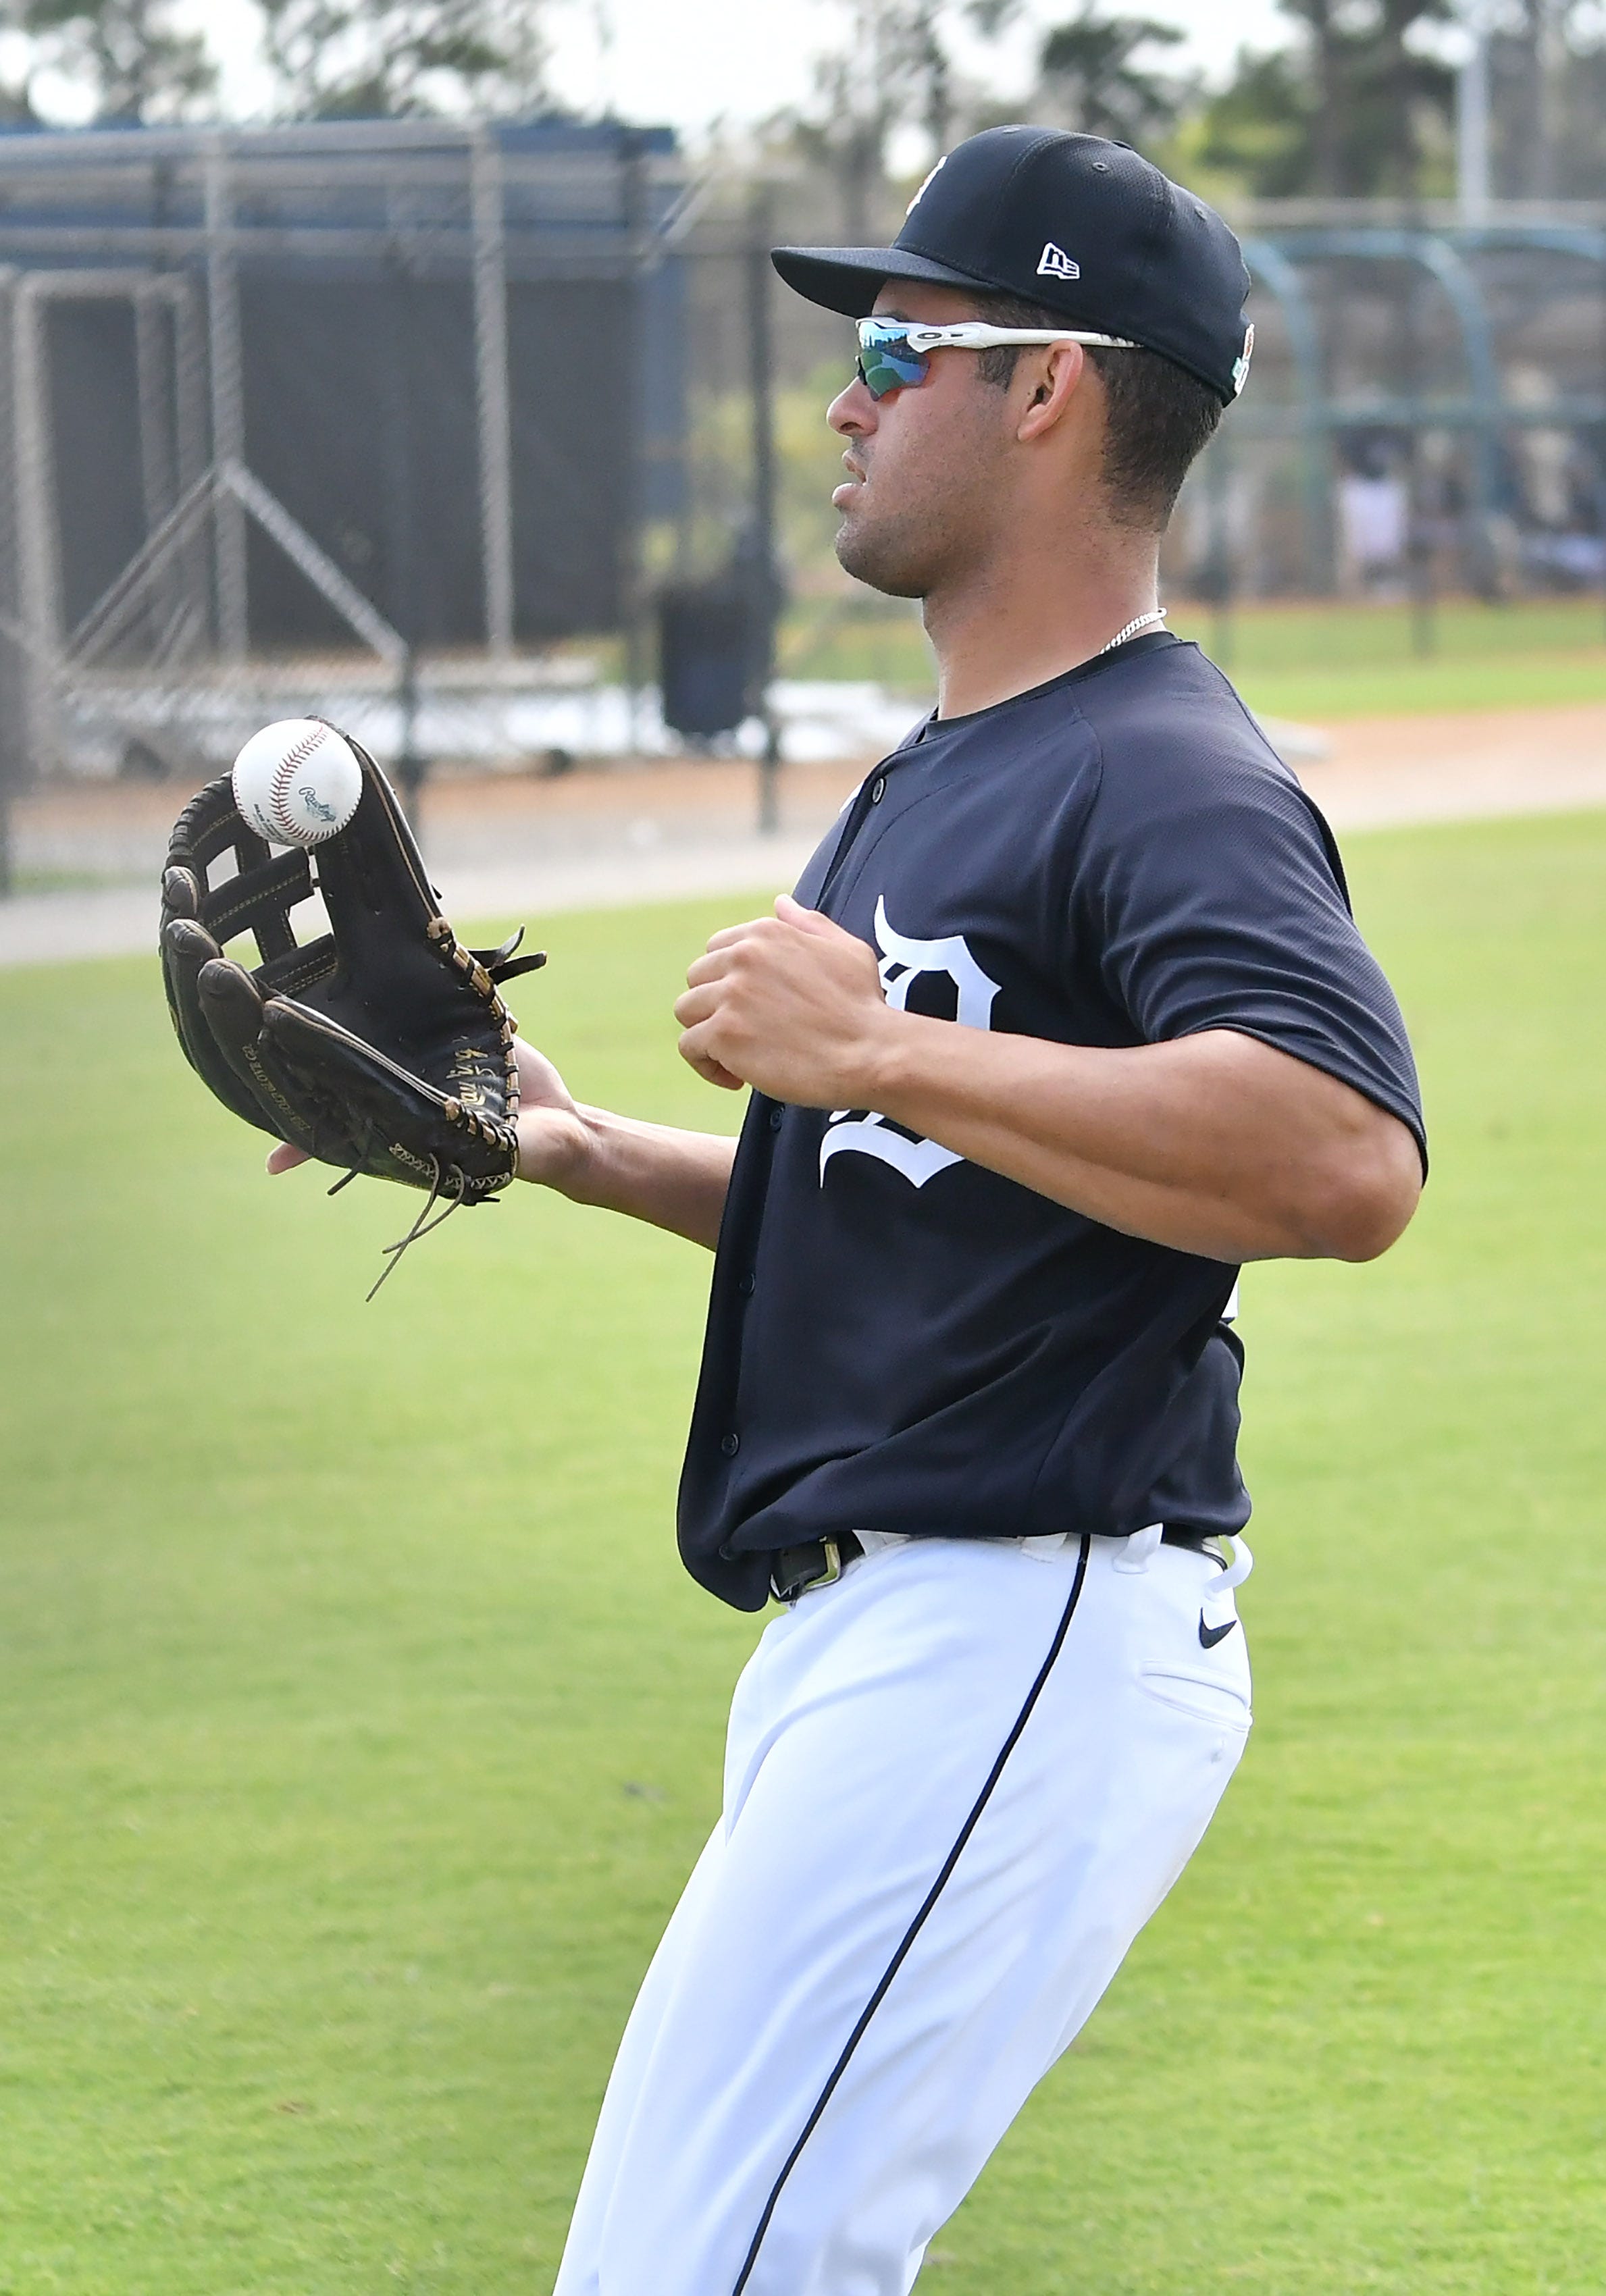 Tigers prospect Riley Greene prepares to throw the ball back in at the team's workout.